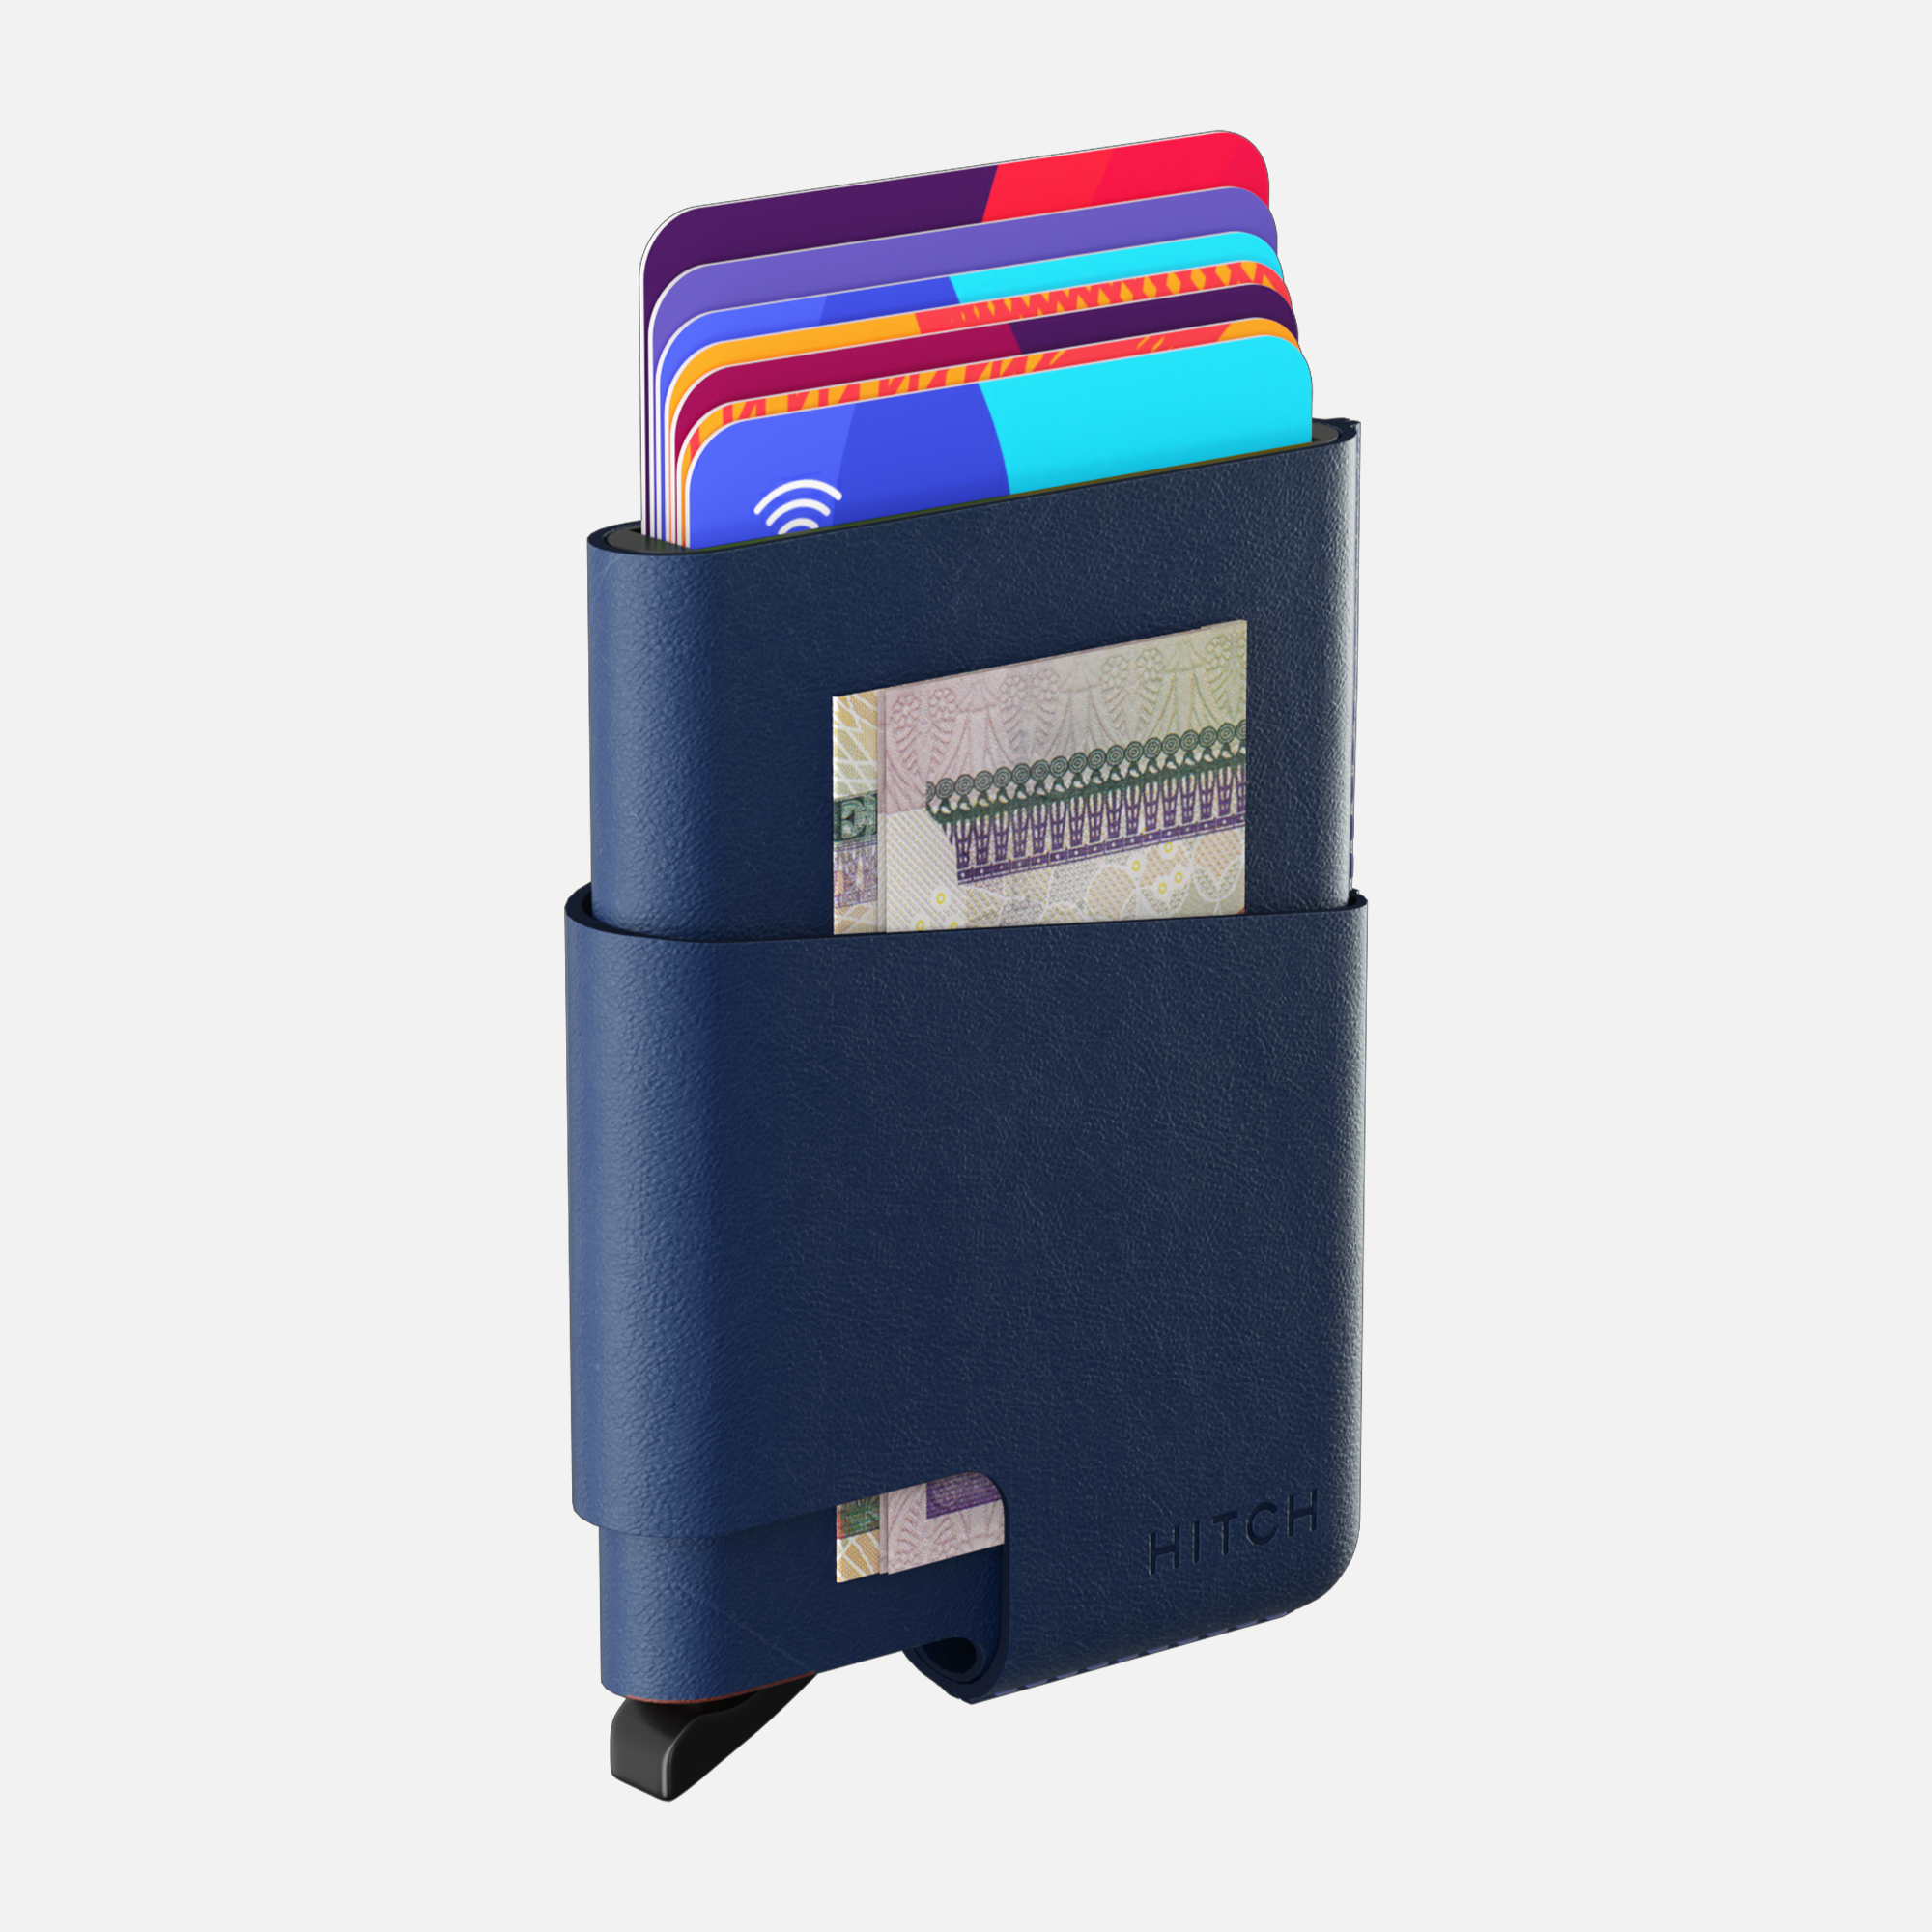 CUT-OUT Cardholder - RFID Block Featured - Handmade Natural Genuine Leather - Navy